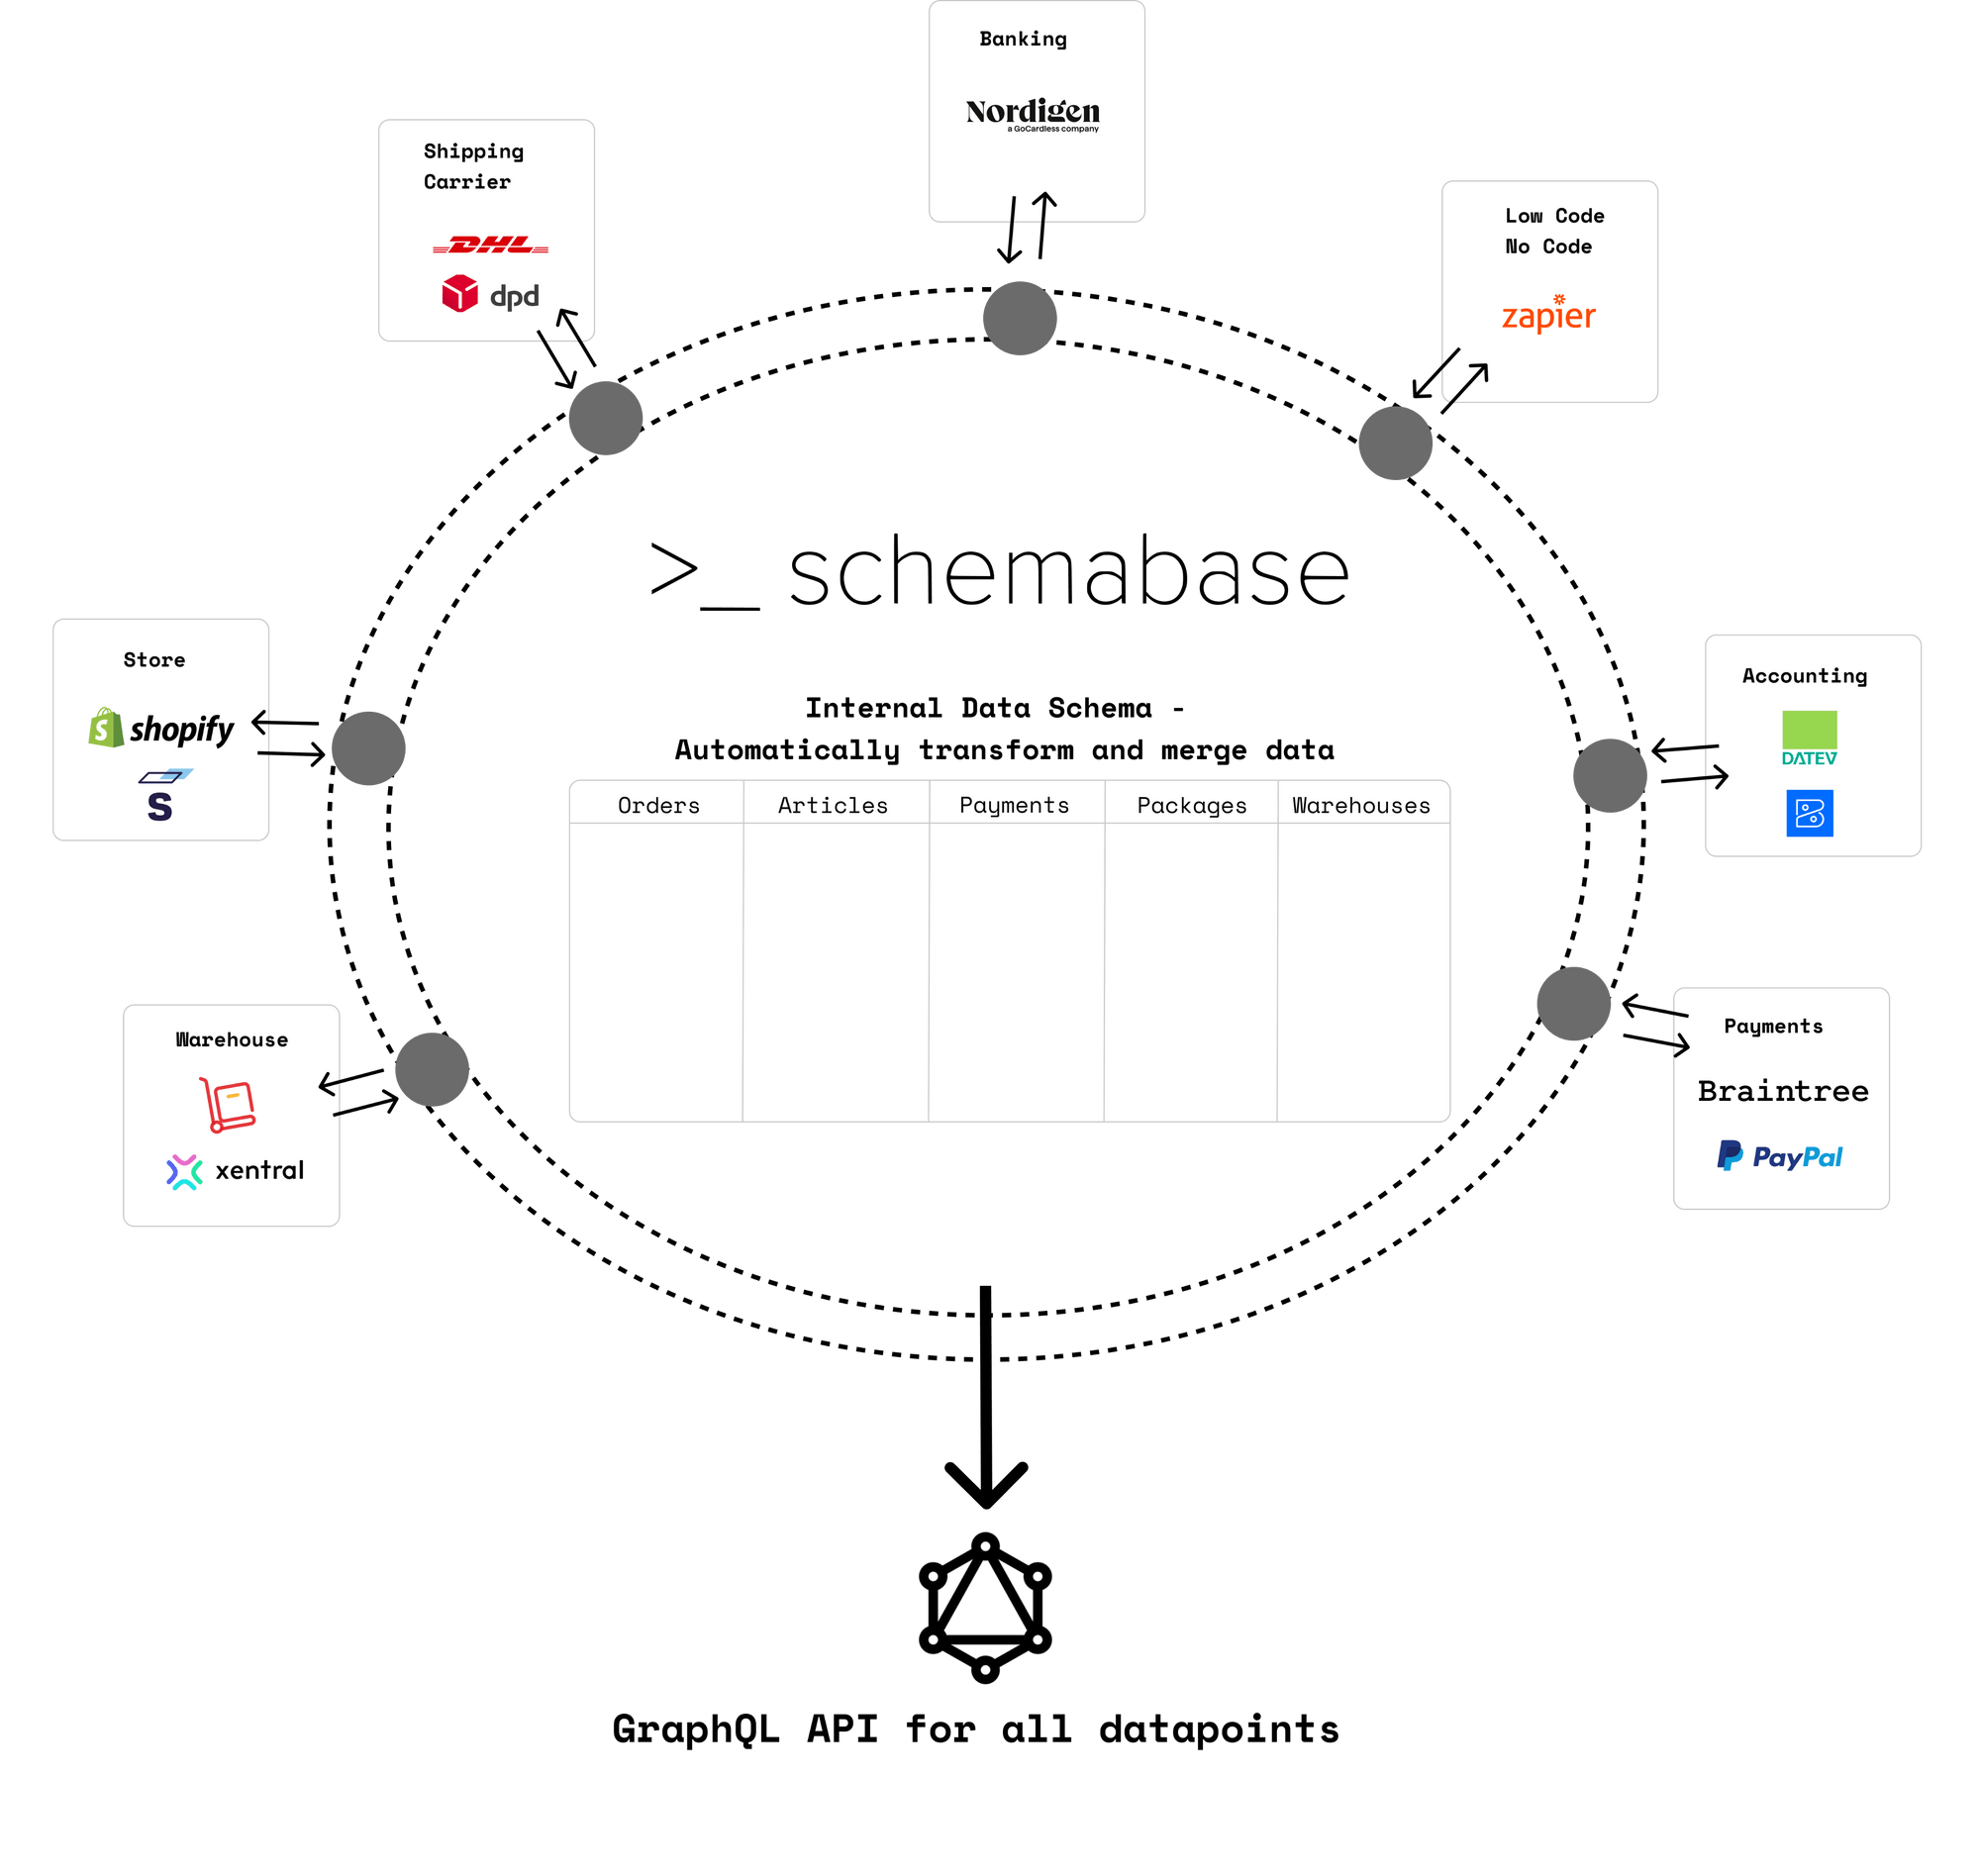 schemabase visualisation (1).png